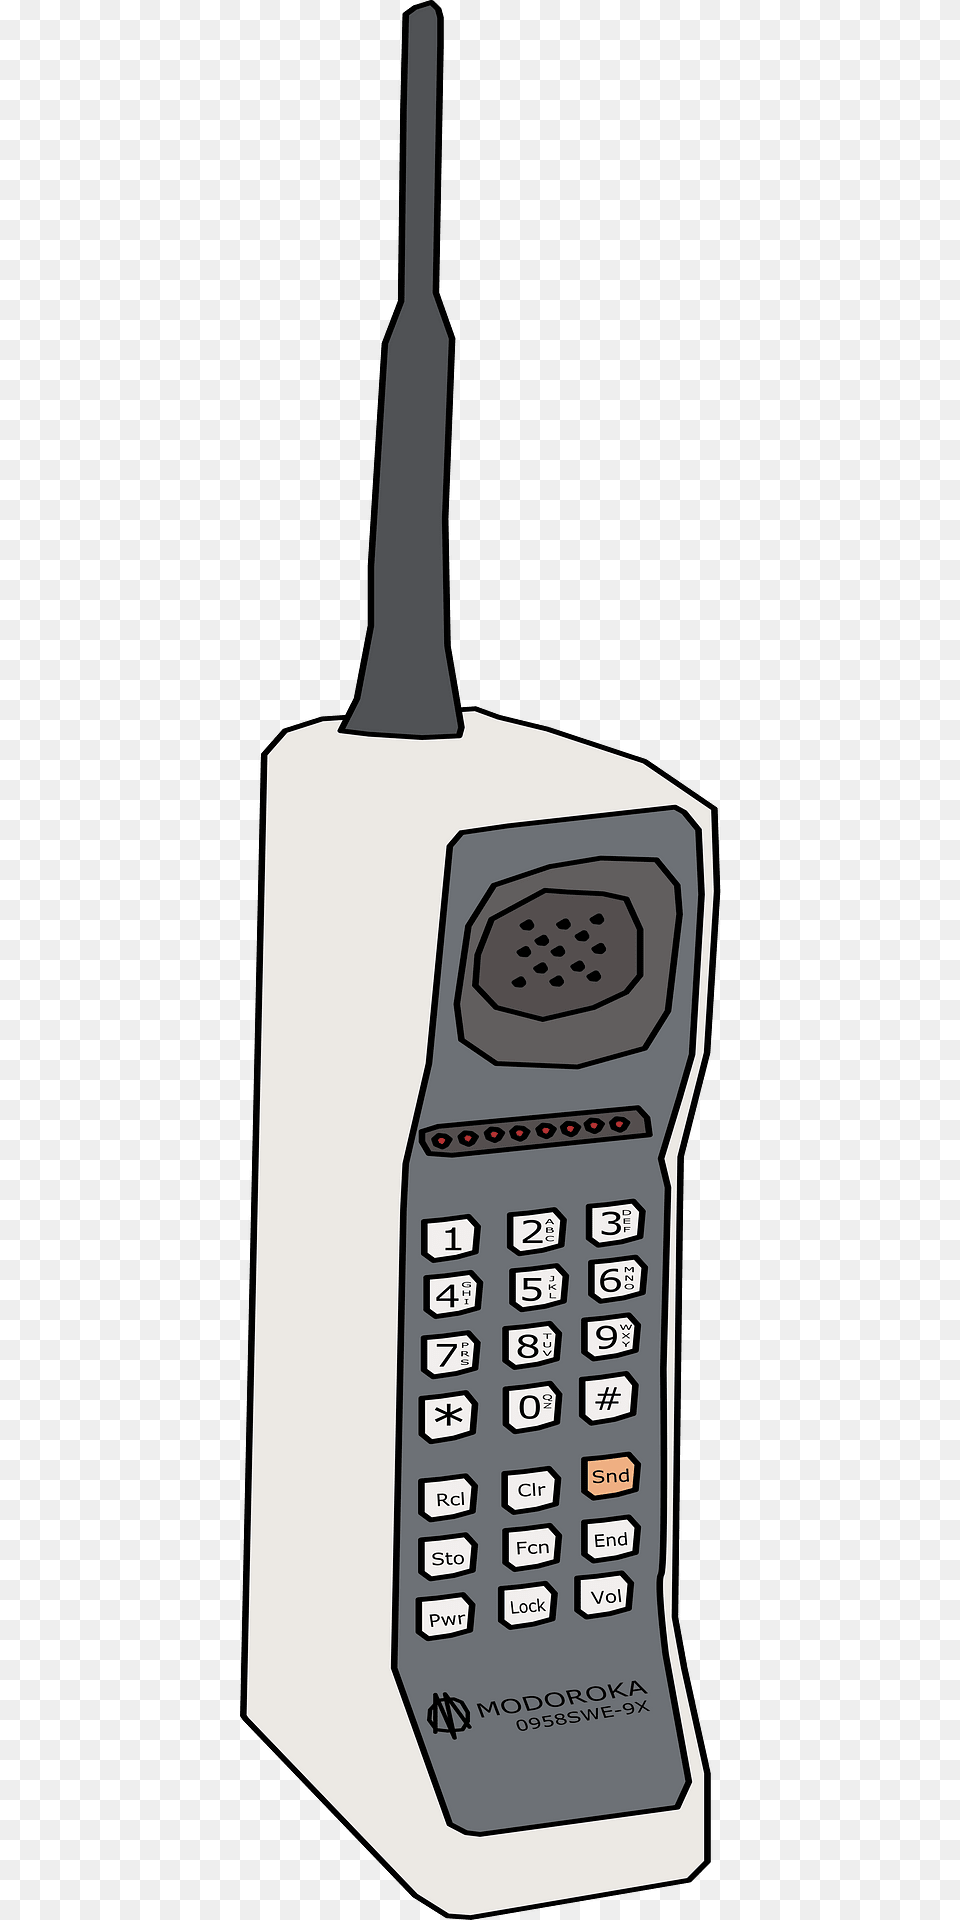 1980s Cellphone Clipart, Electronics, Phone, Mobile Phone Png